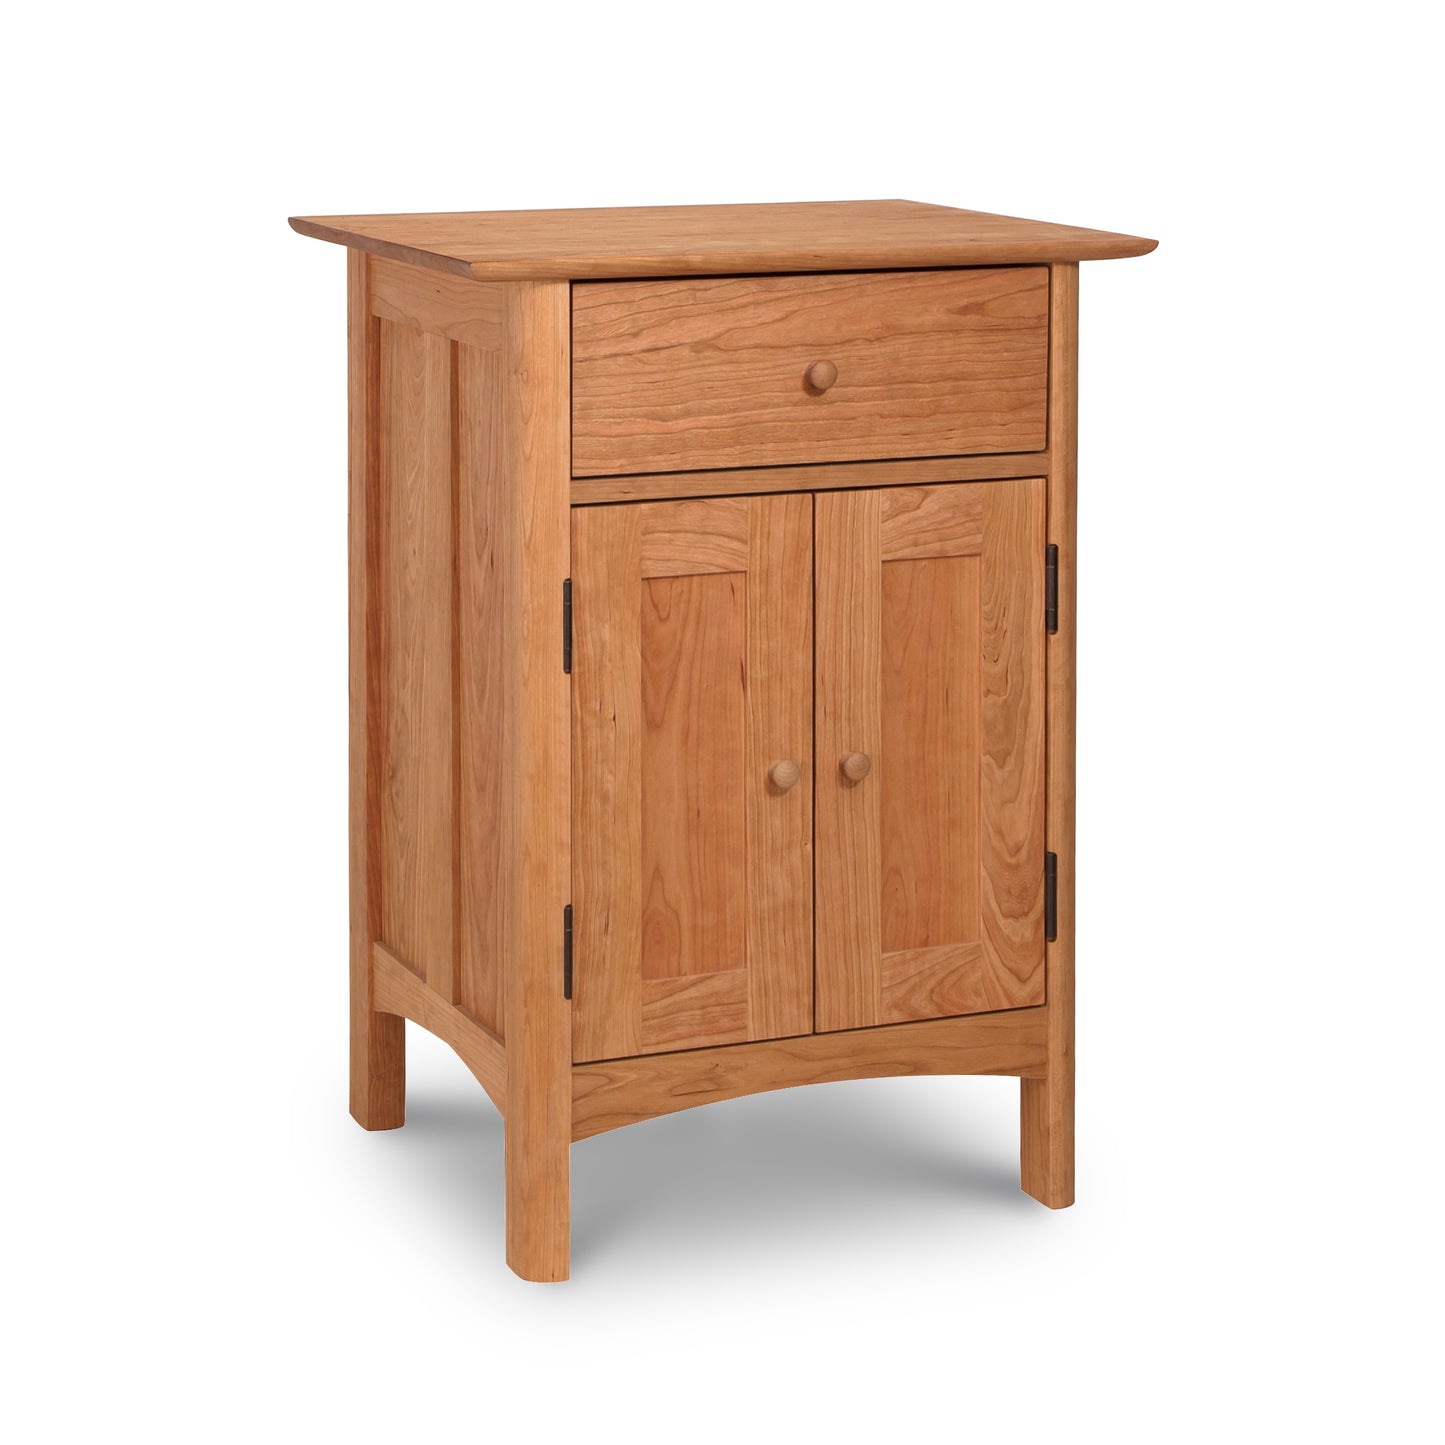 A Heartwood Shaker Short Storage Chest, crafted by Vermont Furniture Designs from solid wood for ample storage.